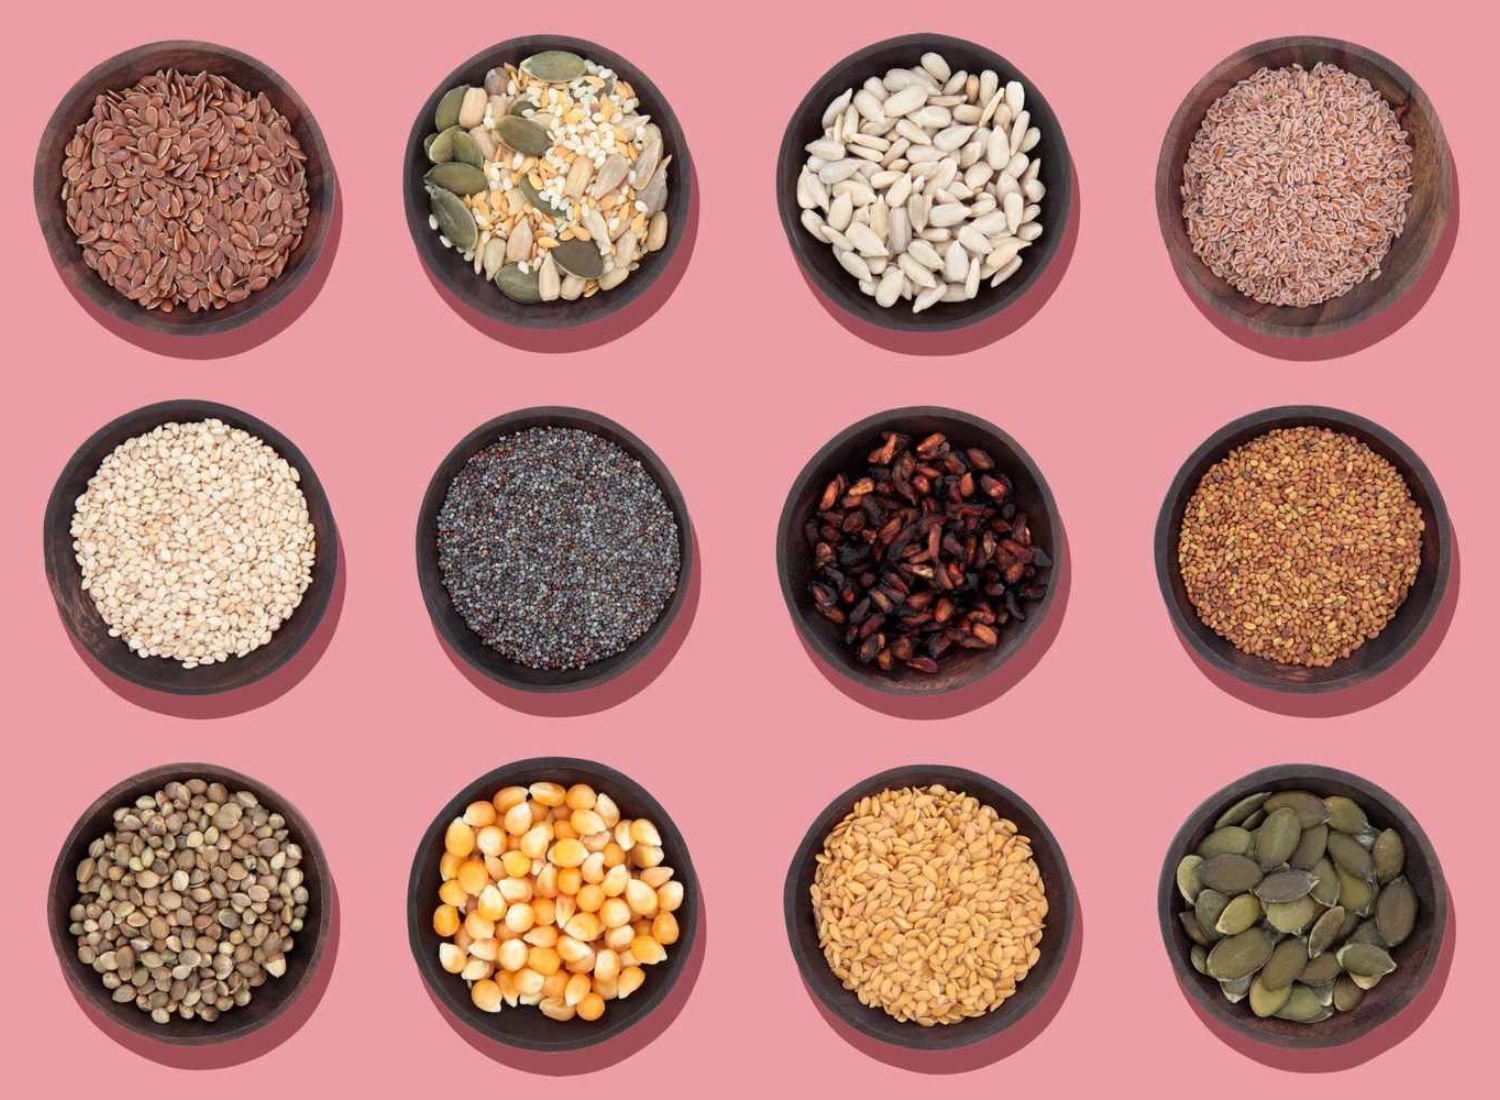 healthy seeds to include in your diet: